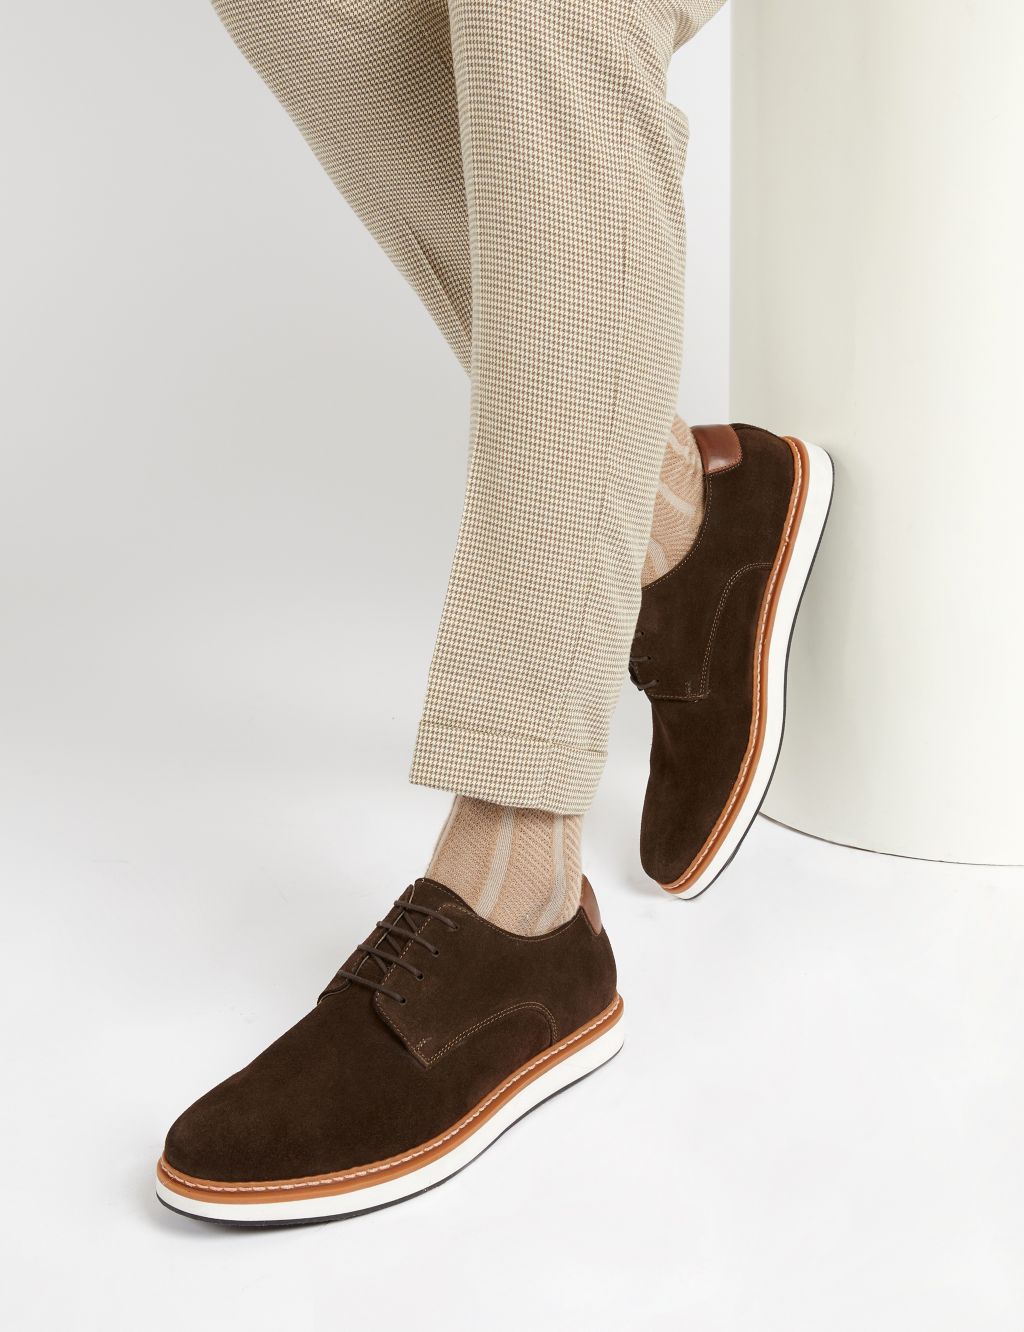 Suede Lace Up Casuals image 1